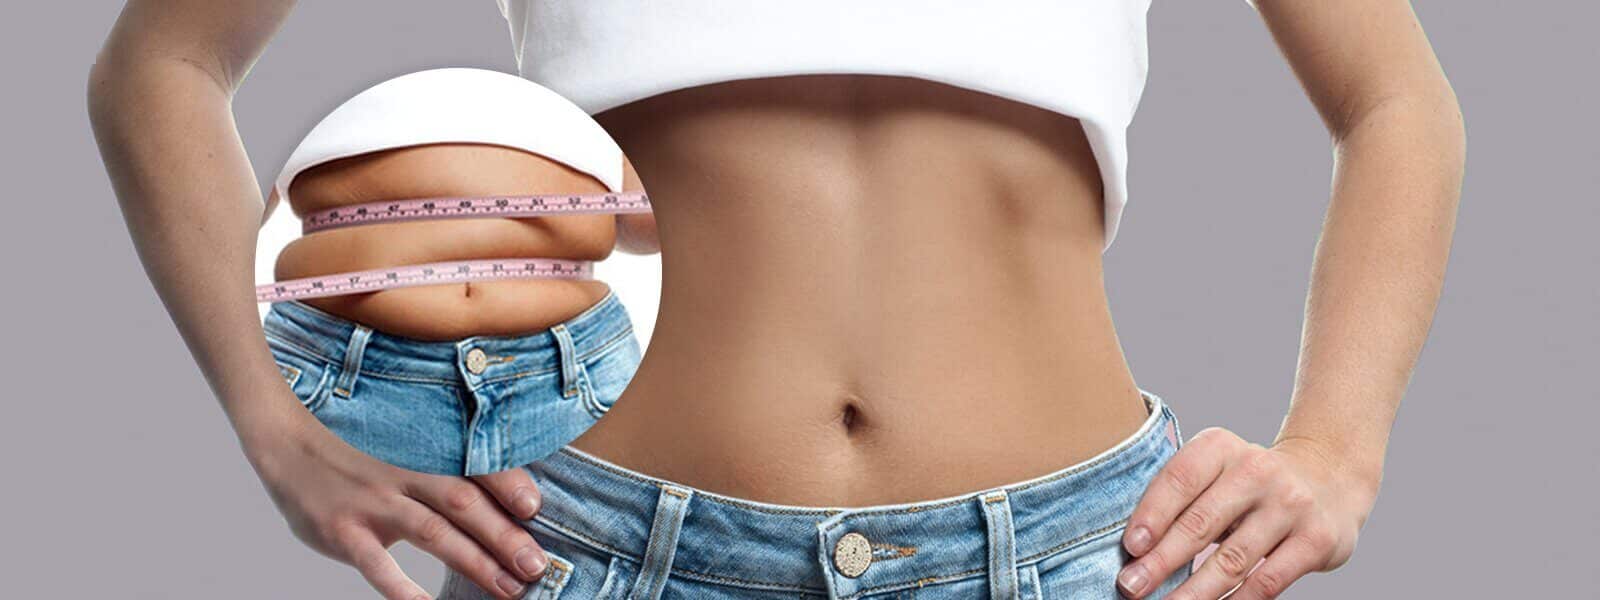 Lose Weight Before Surgery